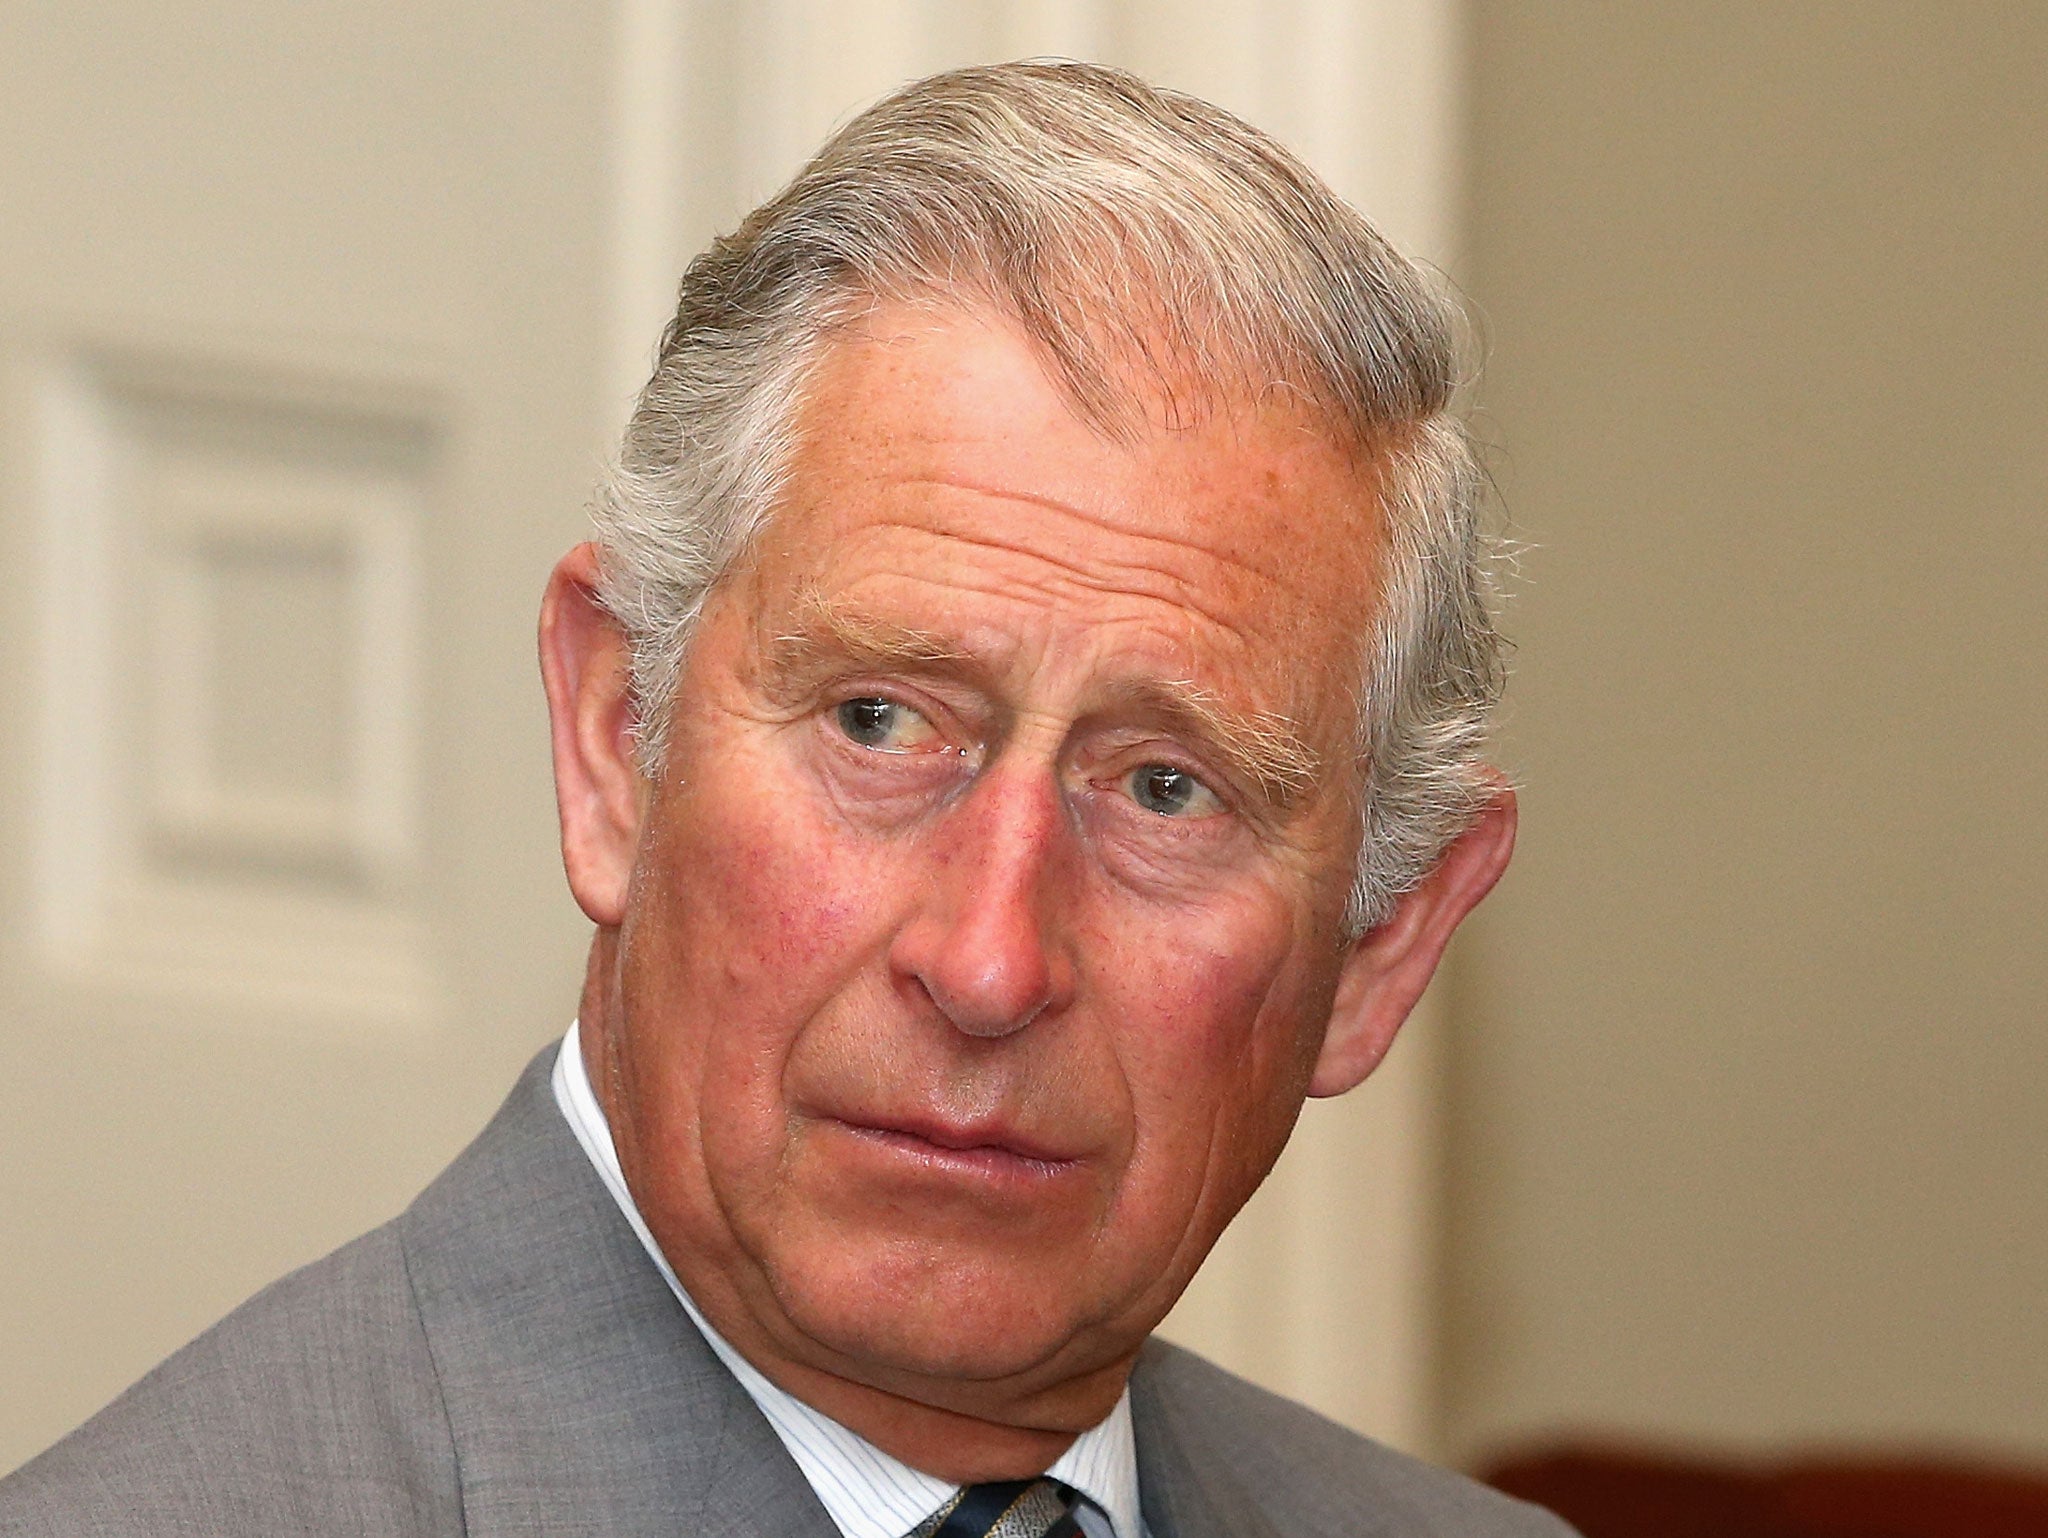 Prince Charles too politically active to become King, according to George Galloway